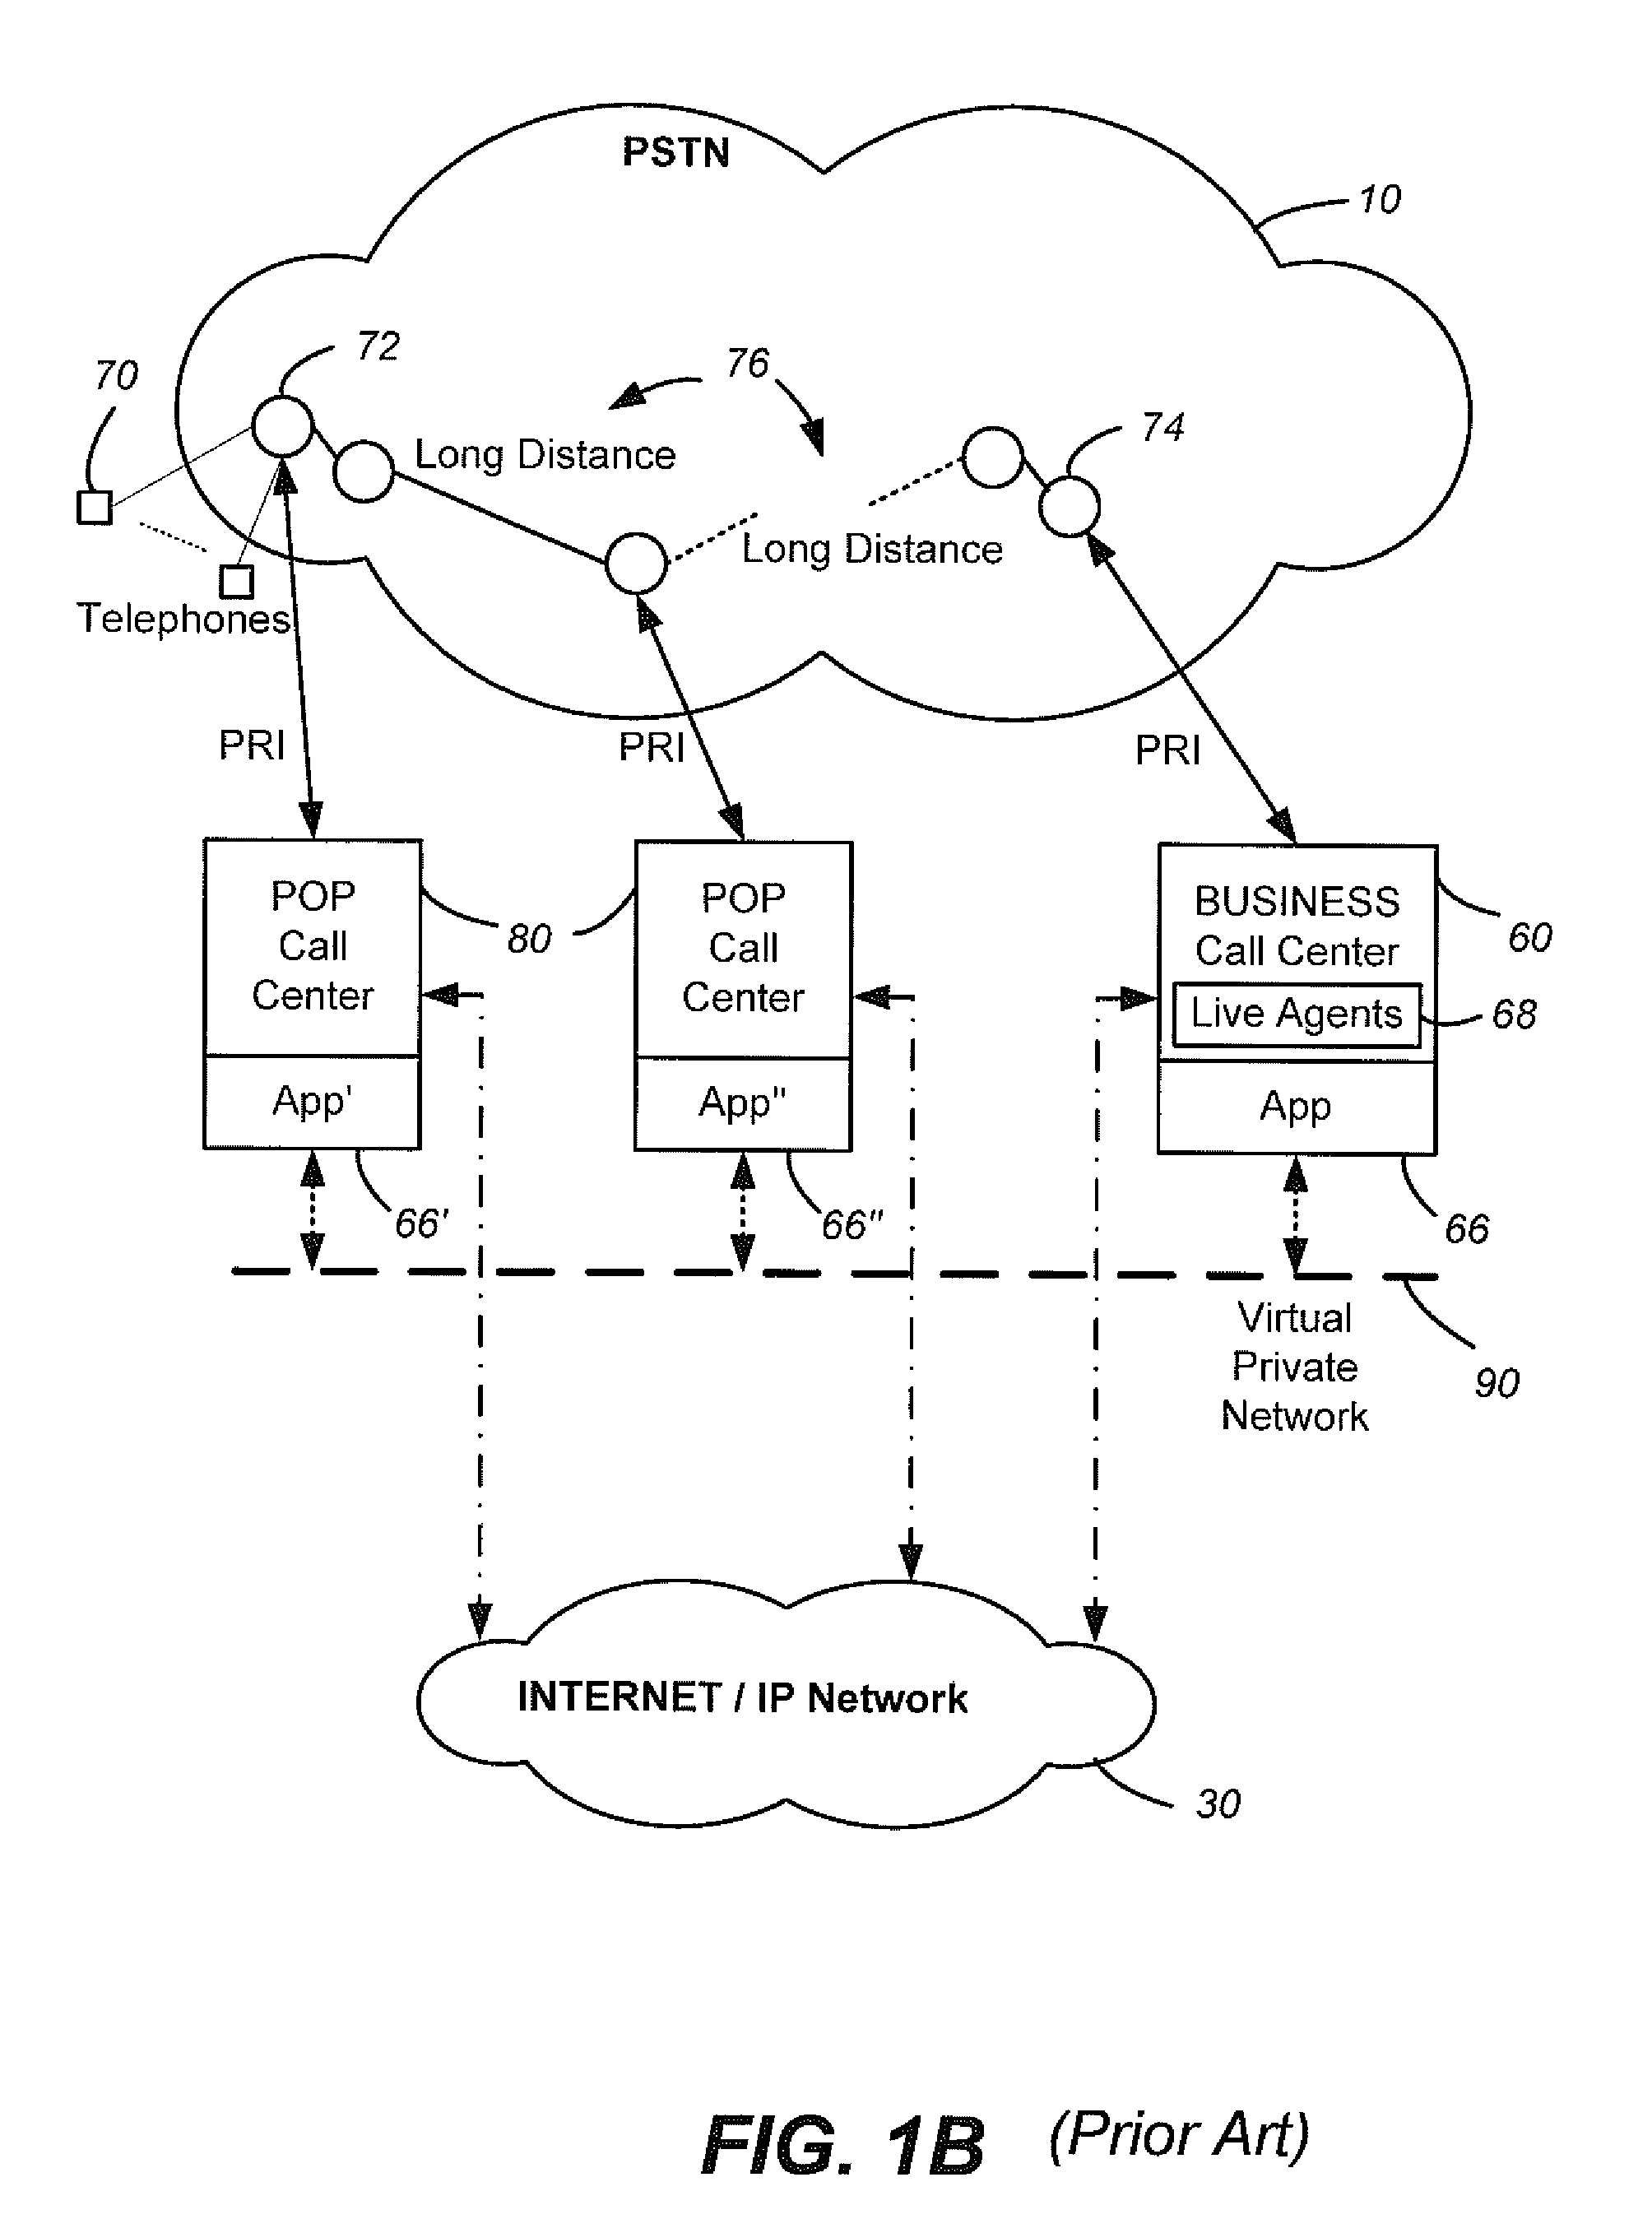 System and method for dynamic telephony resource allocation between premise and hosted facilities